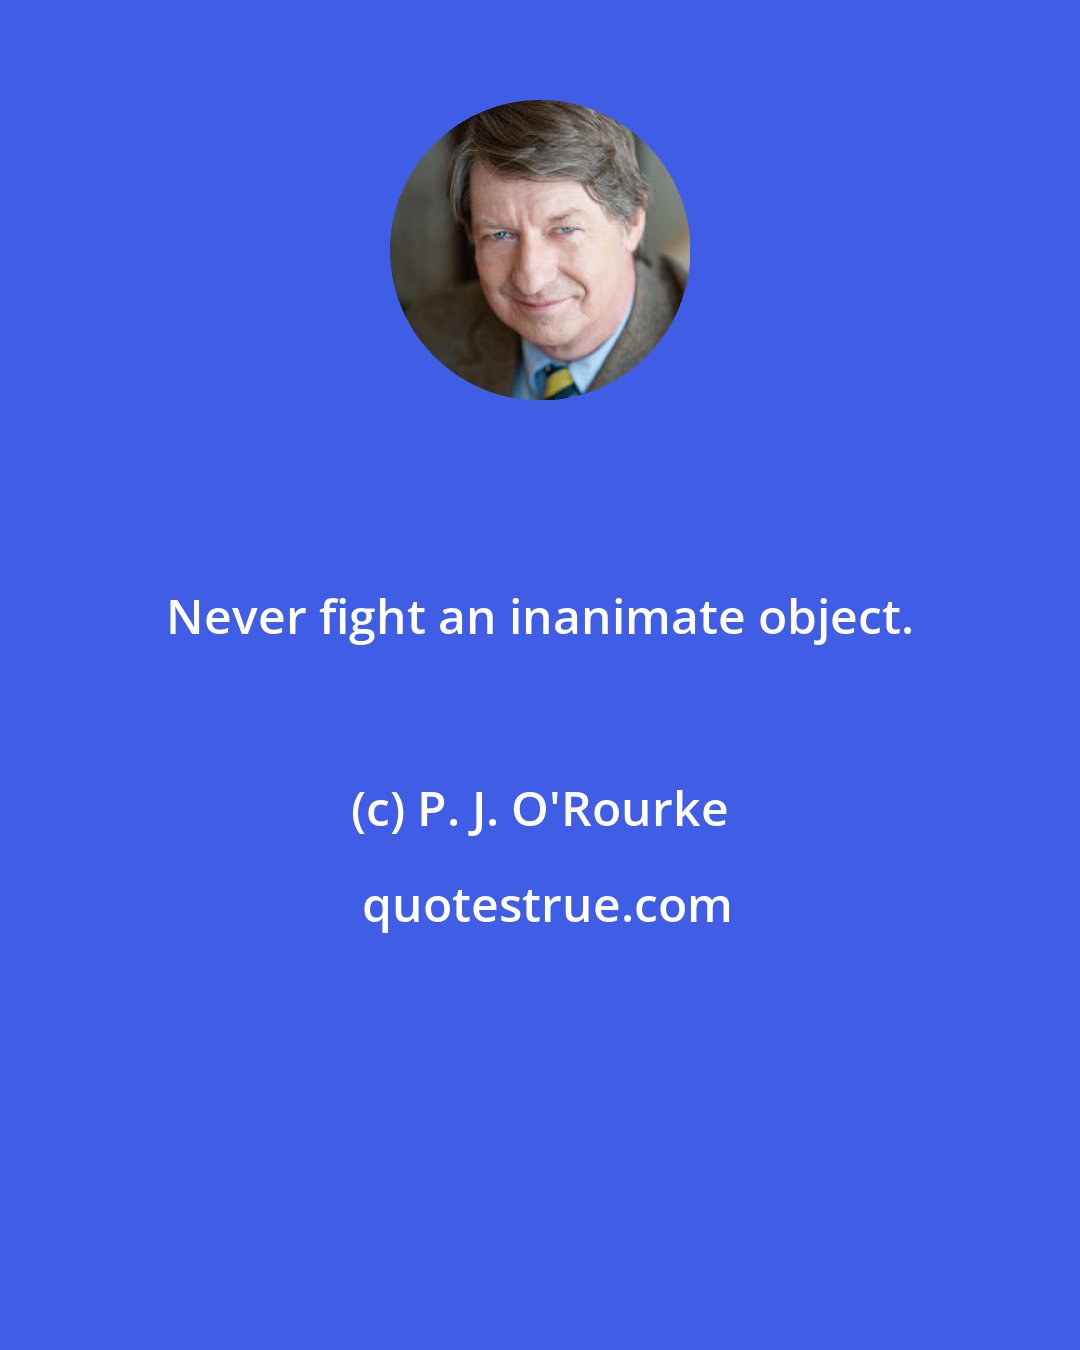 P. J. O'Rourke: Never fight an inanimate object.